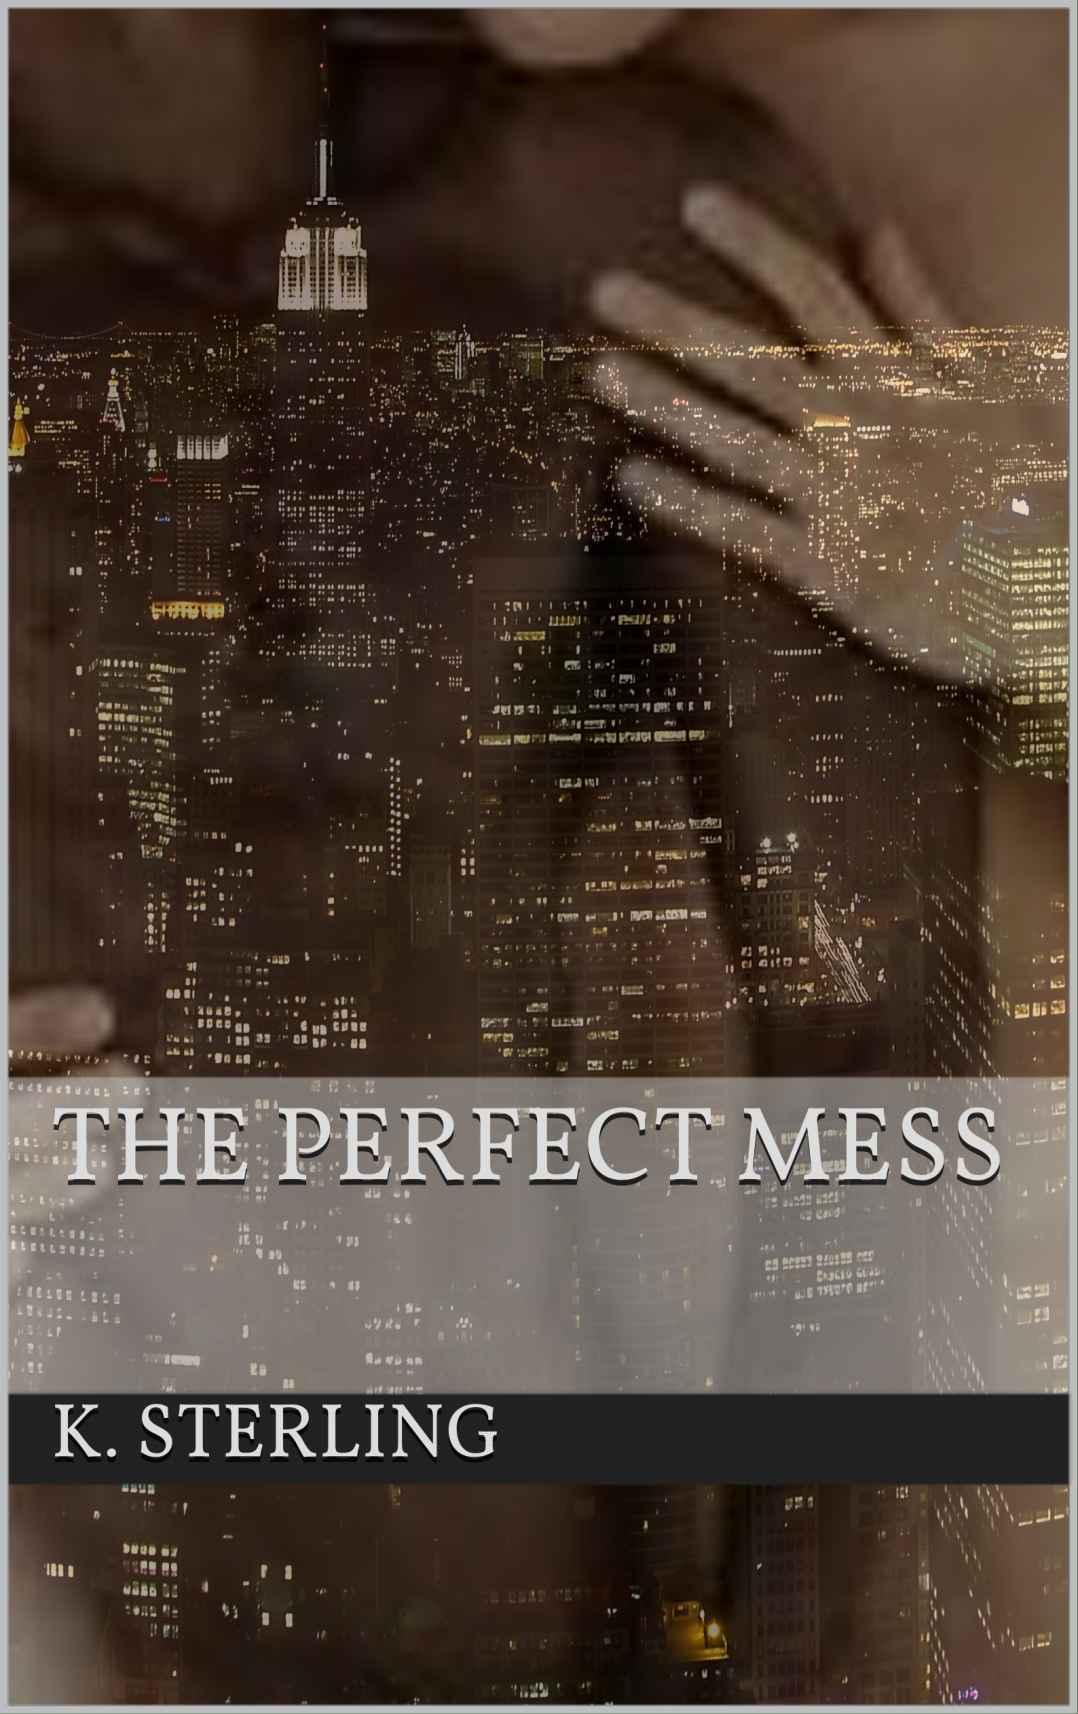 The Perfect Mess by K. Sterling